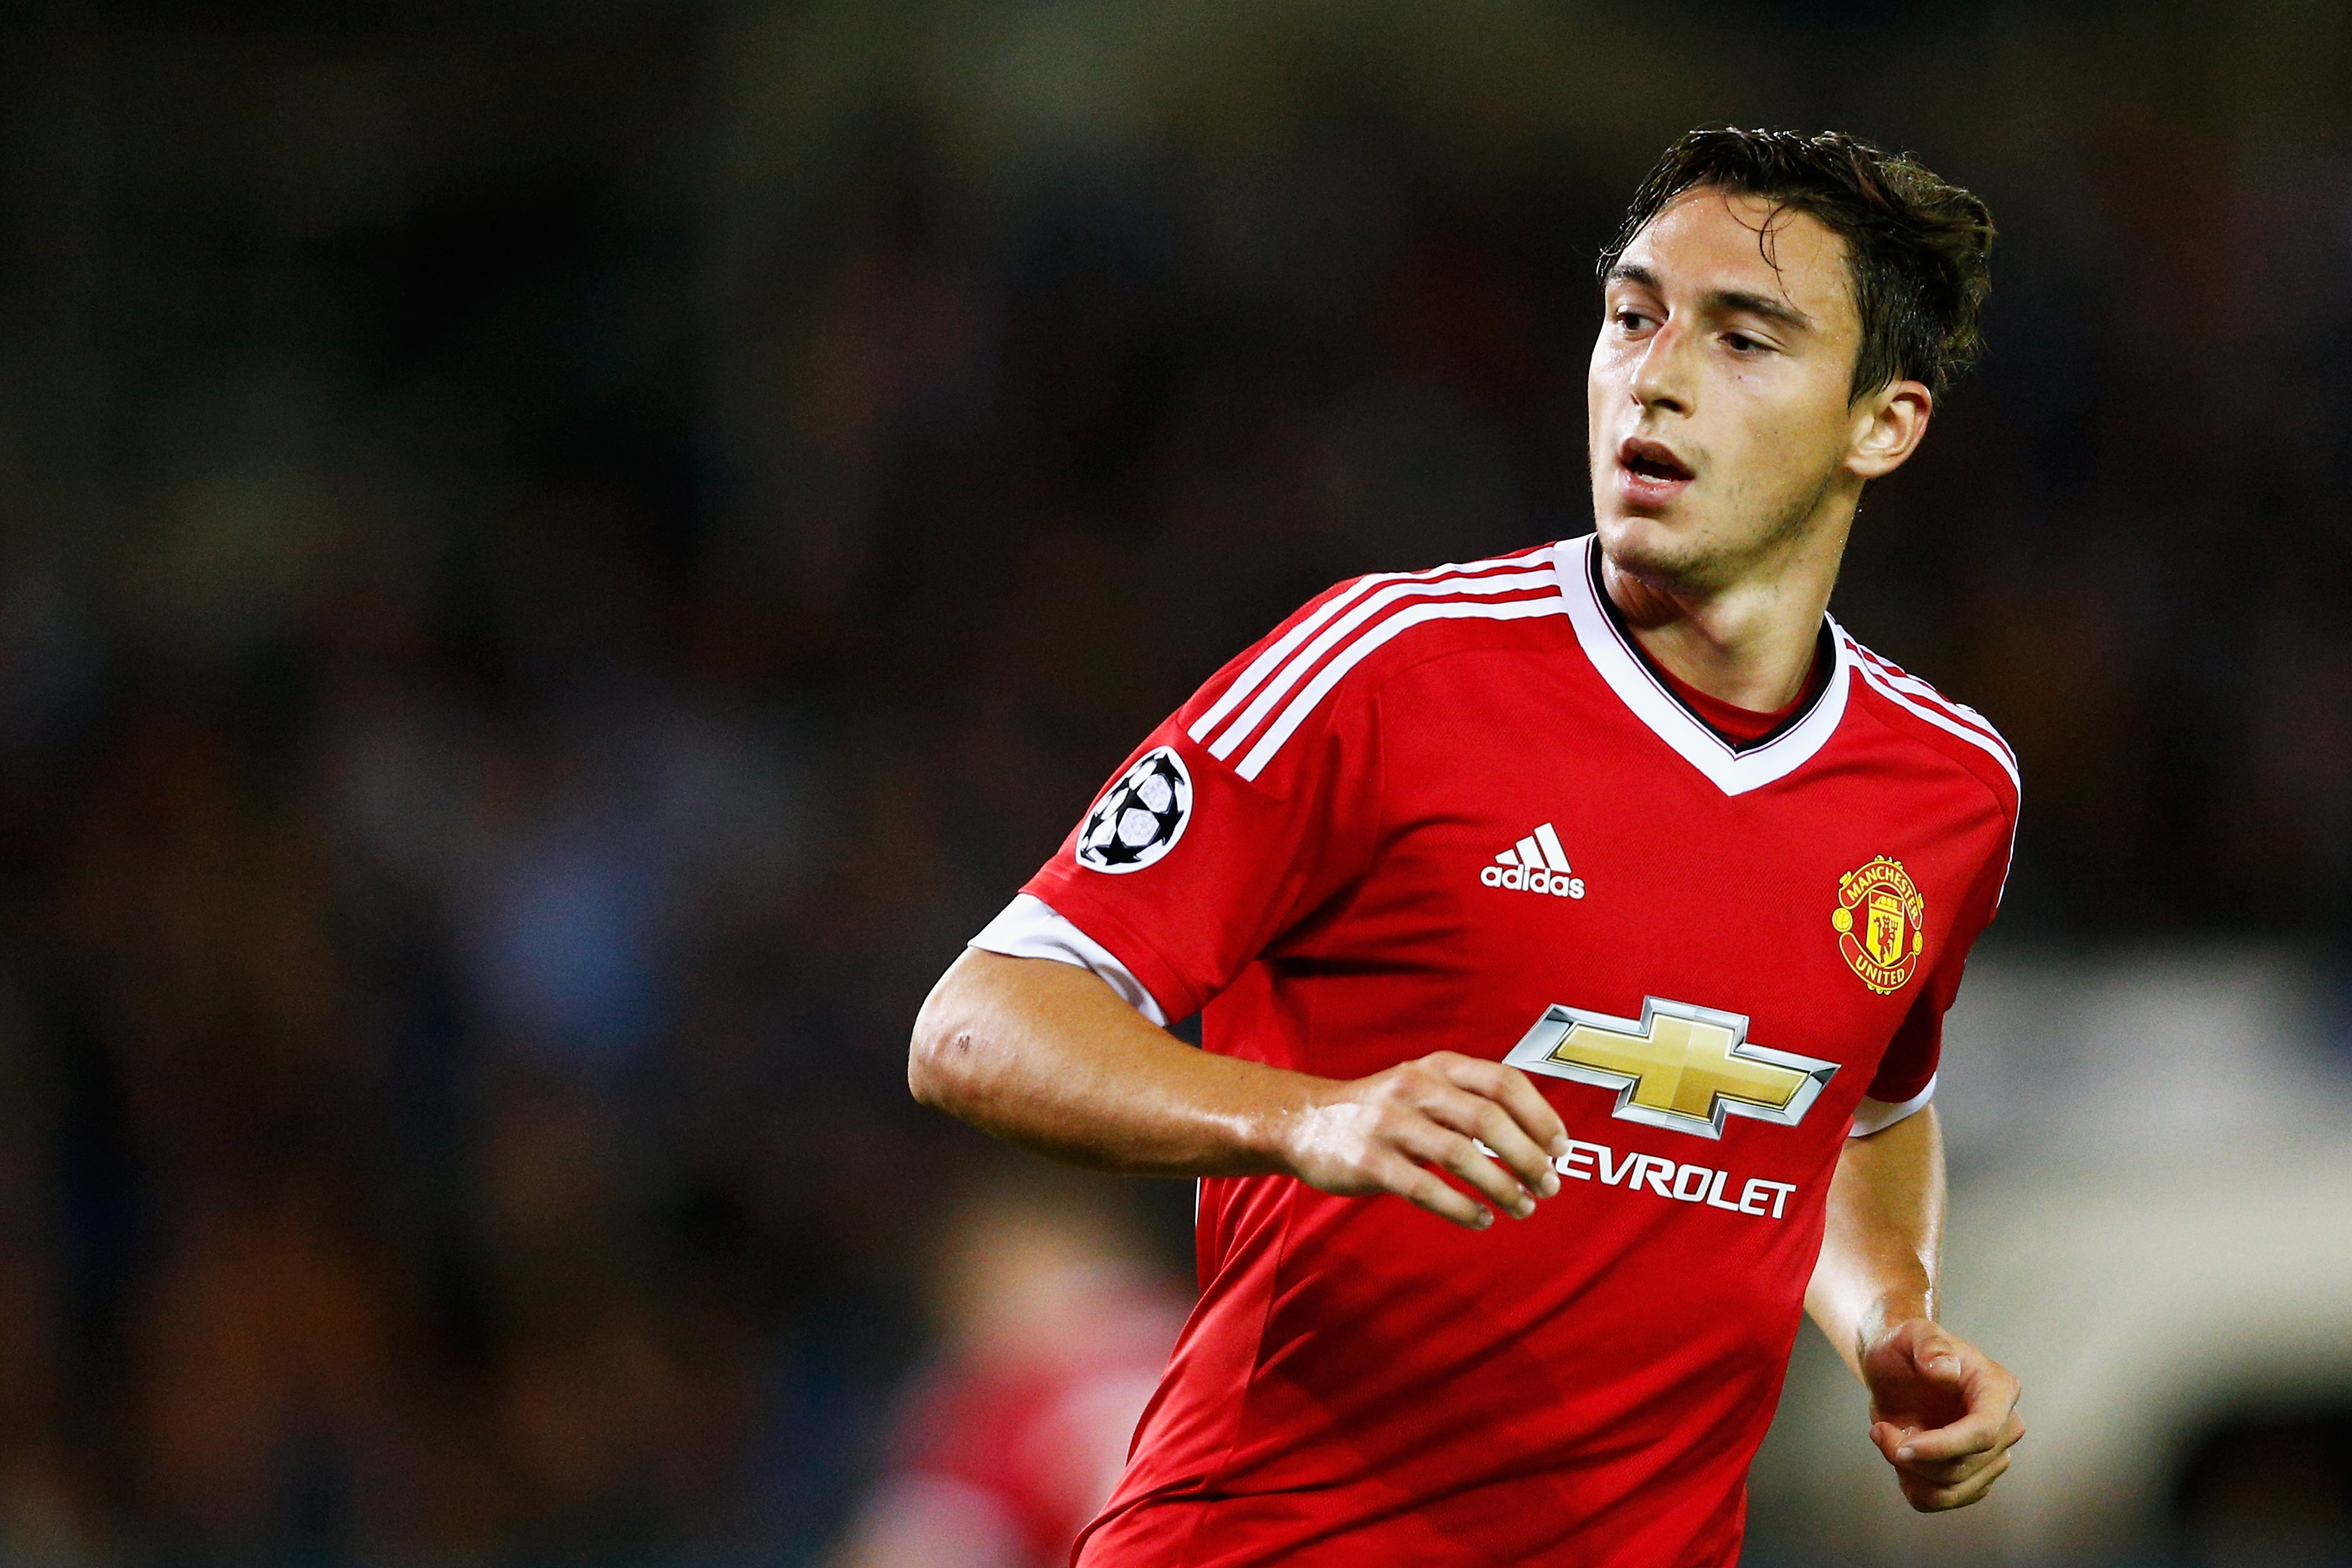 BRUGGE, BELGIUM - AUGUST 26:  Matteo Darmian of Manchester United looks on during the UEFA Champions League qualifying round play off 2nd leg match between Club Brugge and Manchester United held at Jan Breydel Stadium on August 26, 2015 in Brugge, Belgium.  (Photo by Dean Mouhtaropoulos/Getty Images)